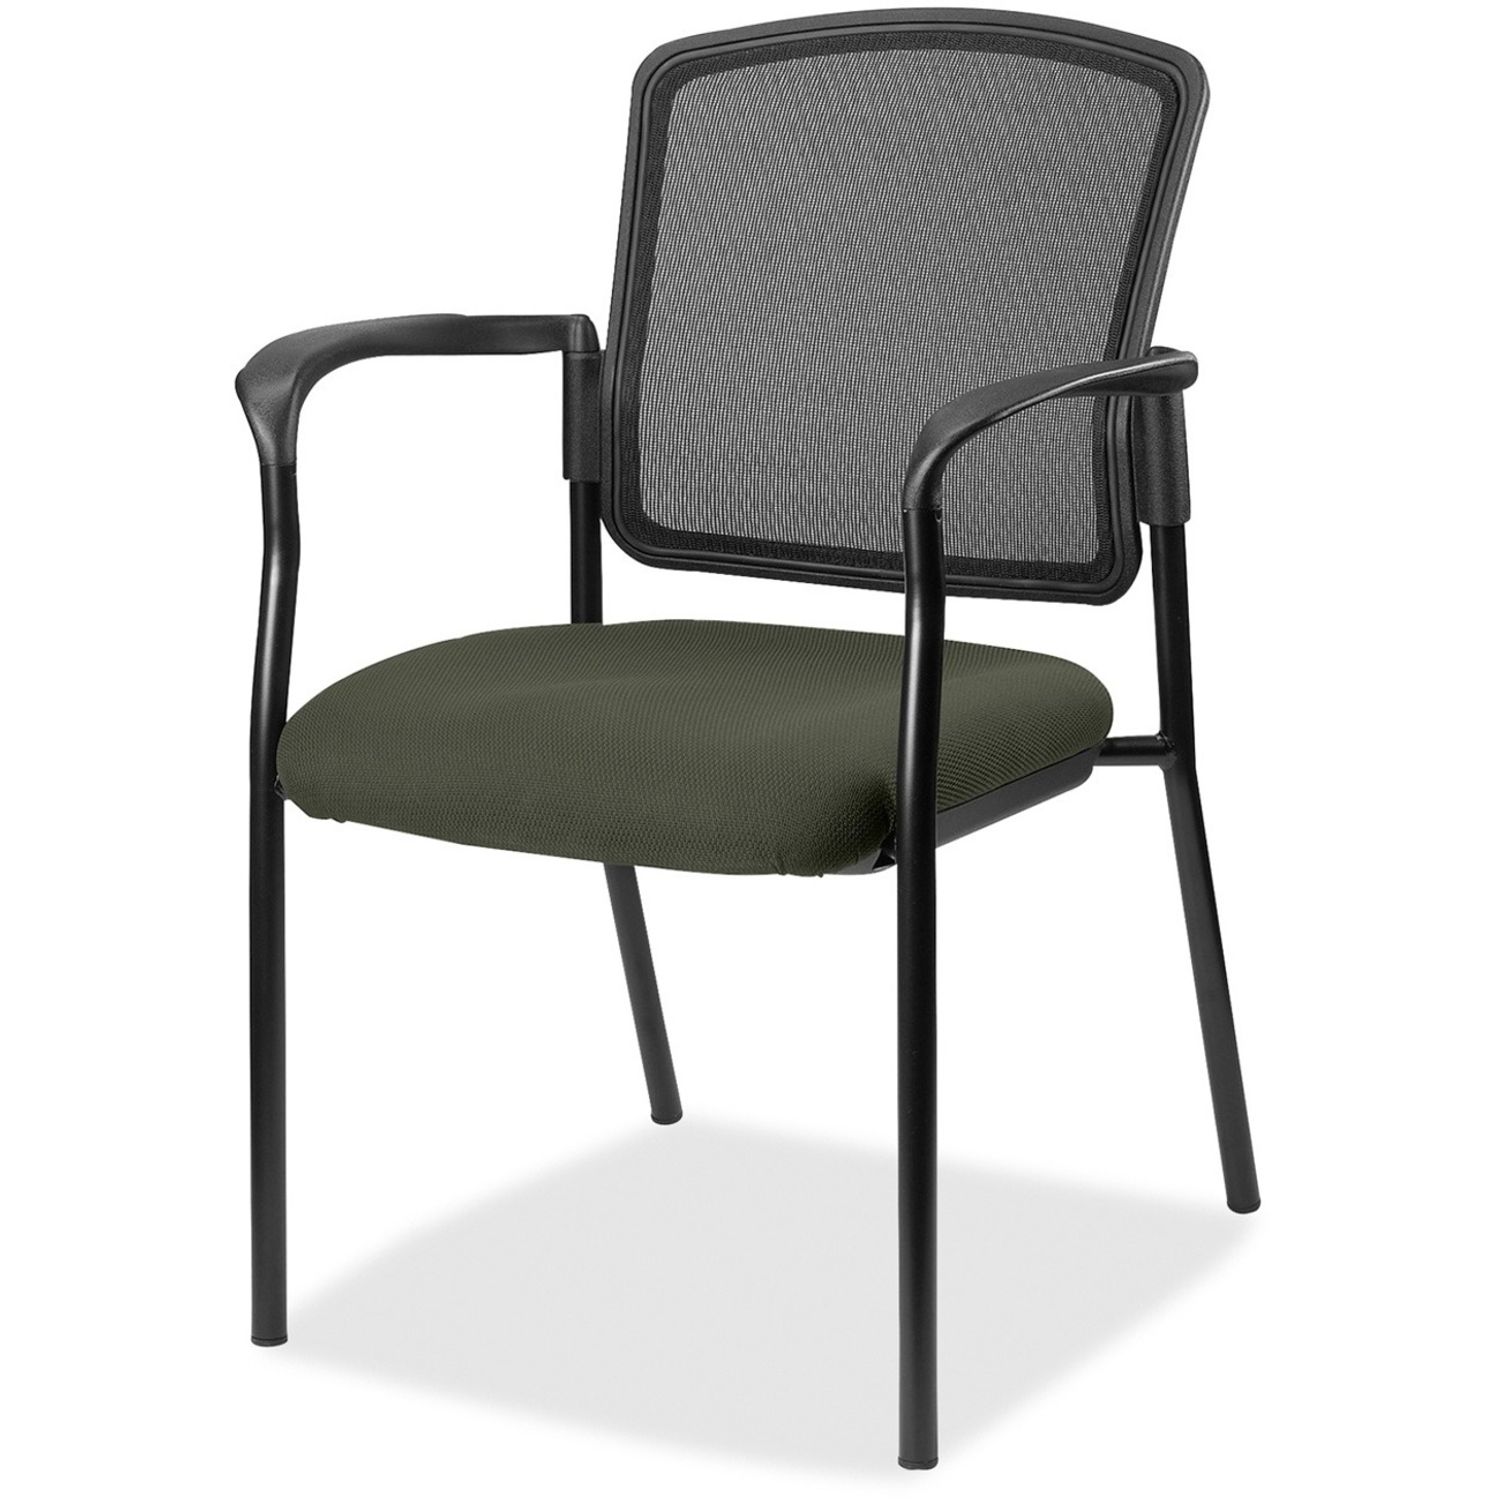 Guest Meshback/Black Frame Chair, Perfection Olive Green Seat, Black Frame, 1 Each